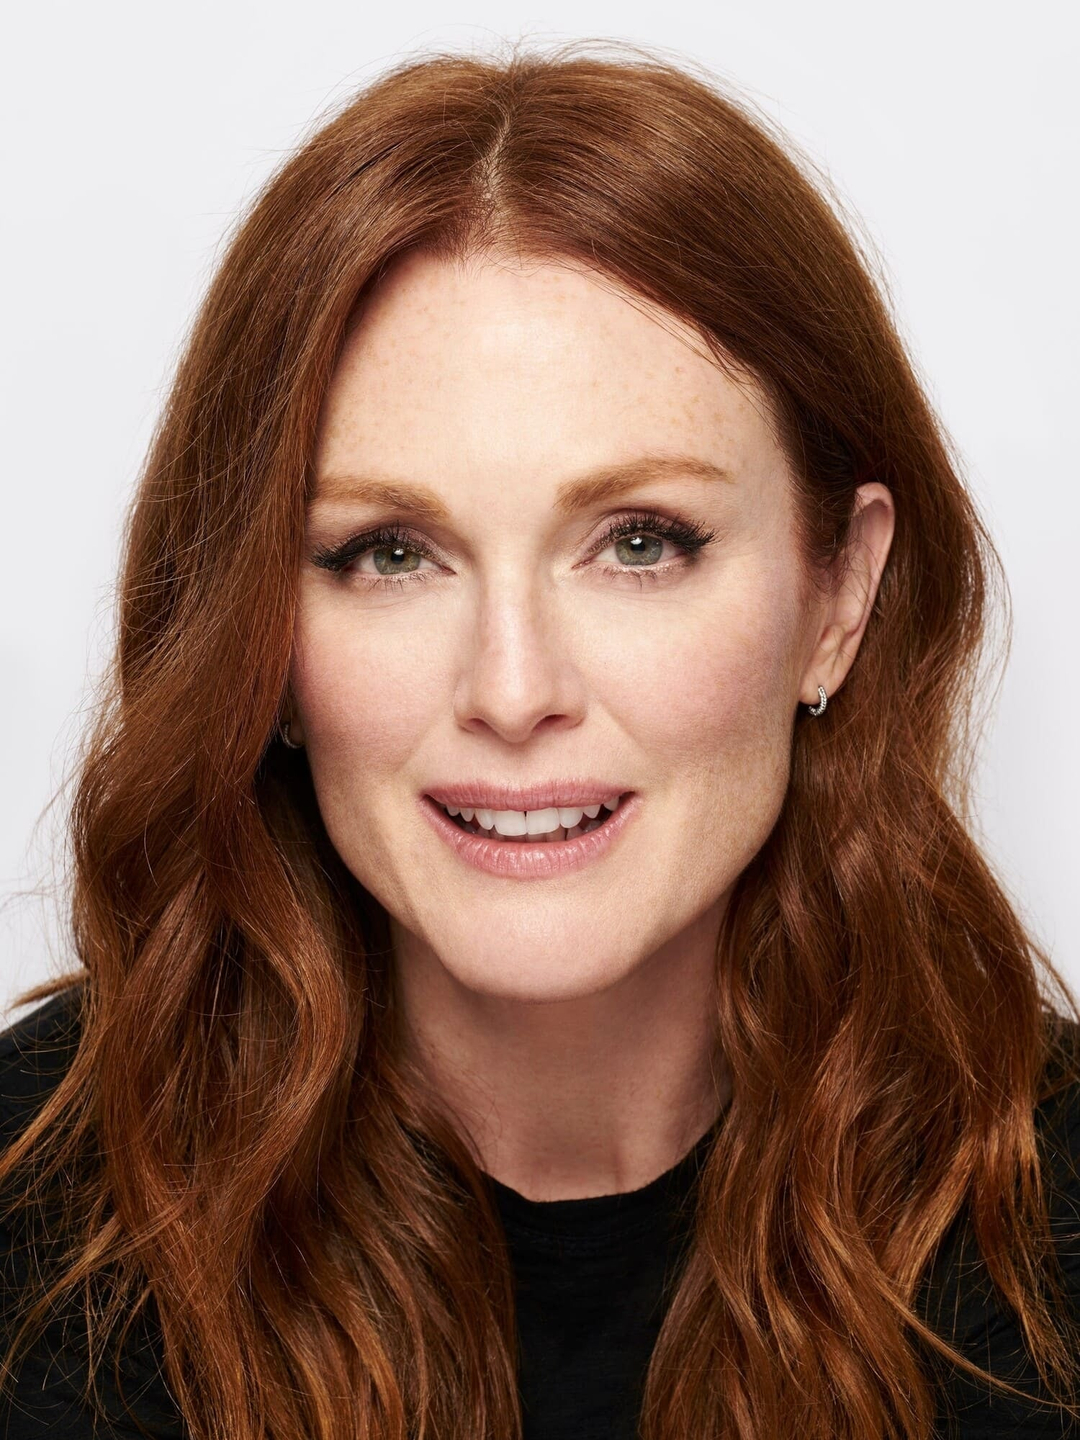 Julianne Moore young pics